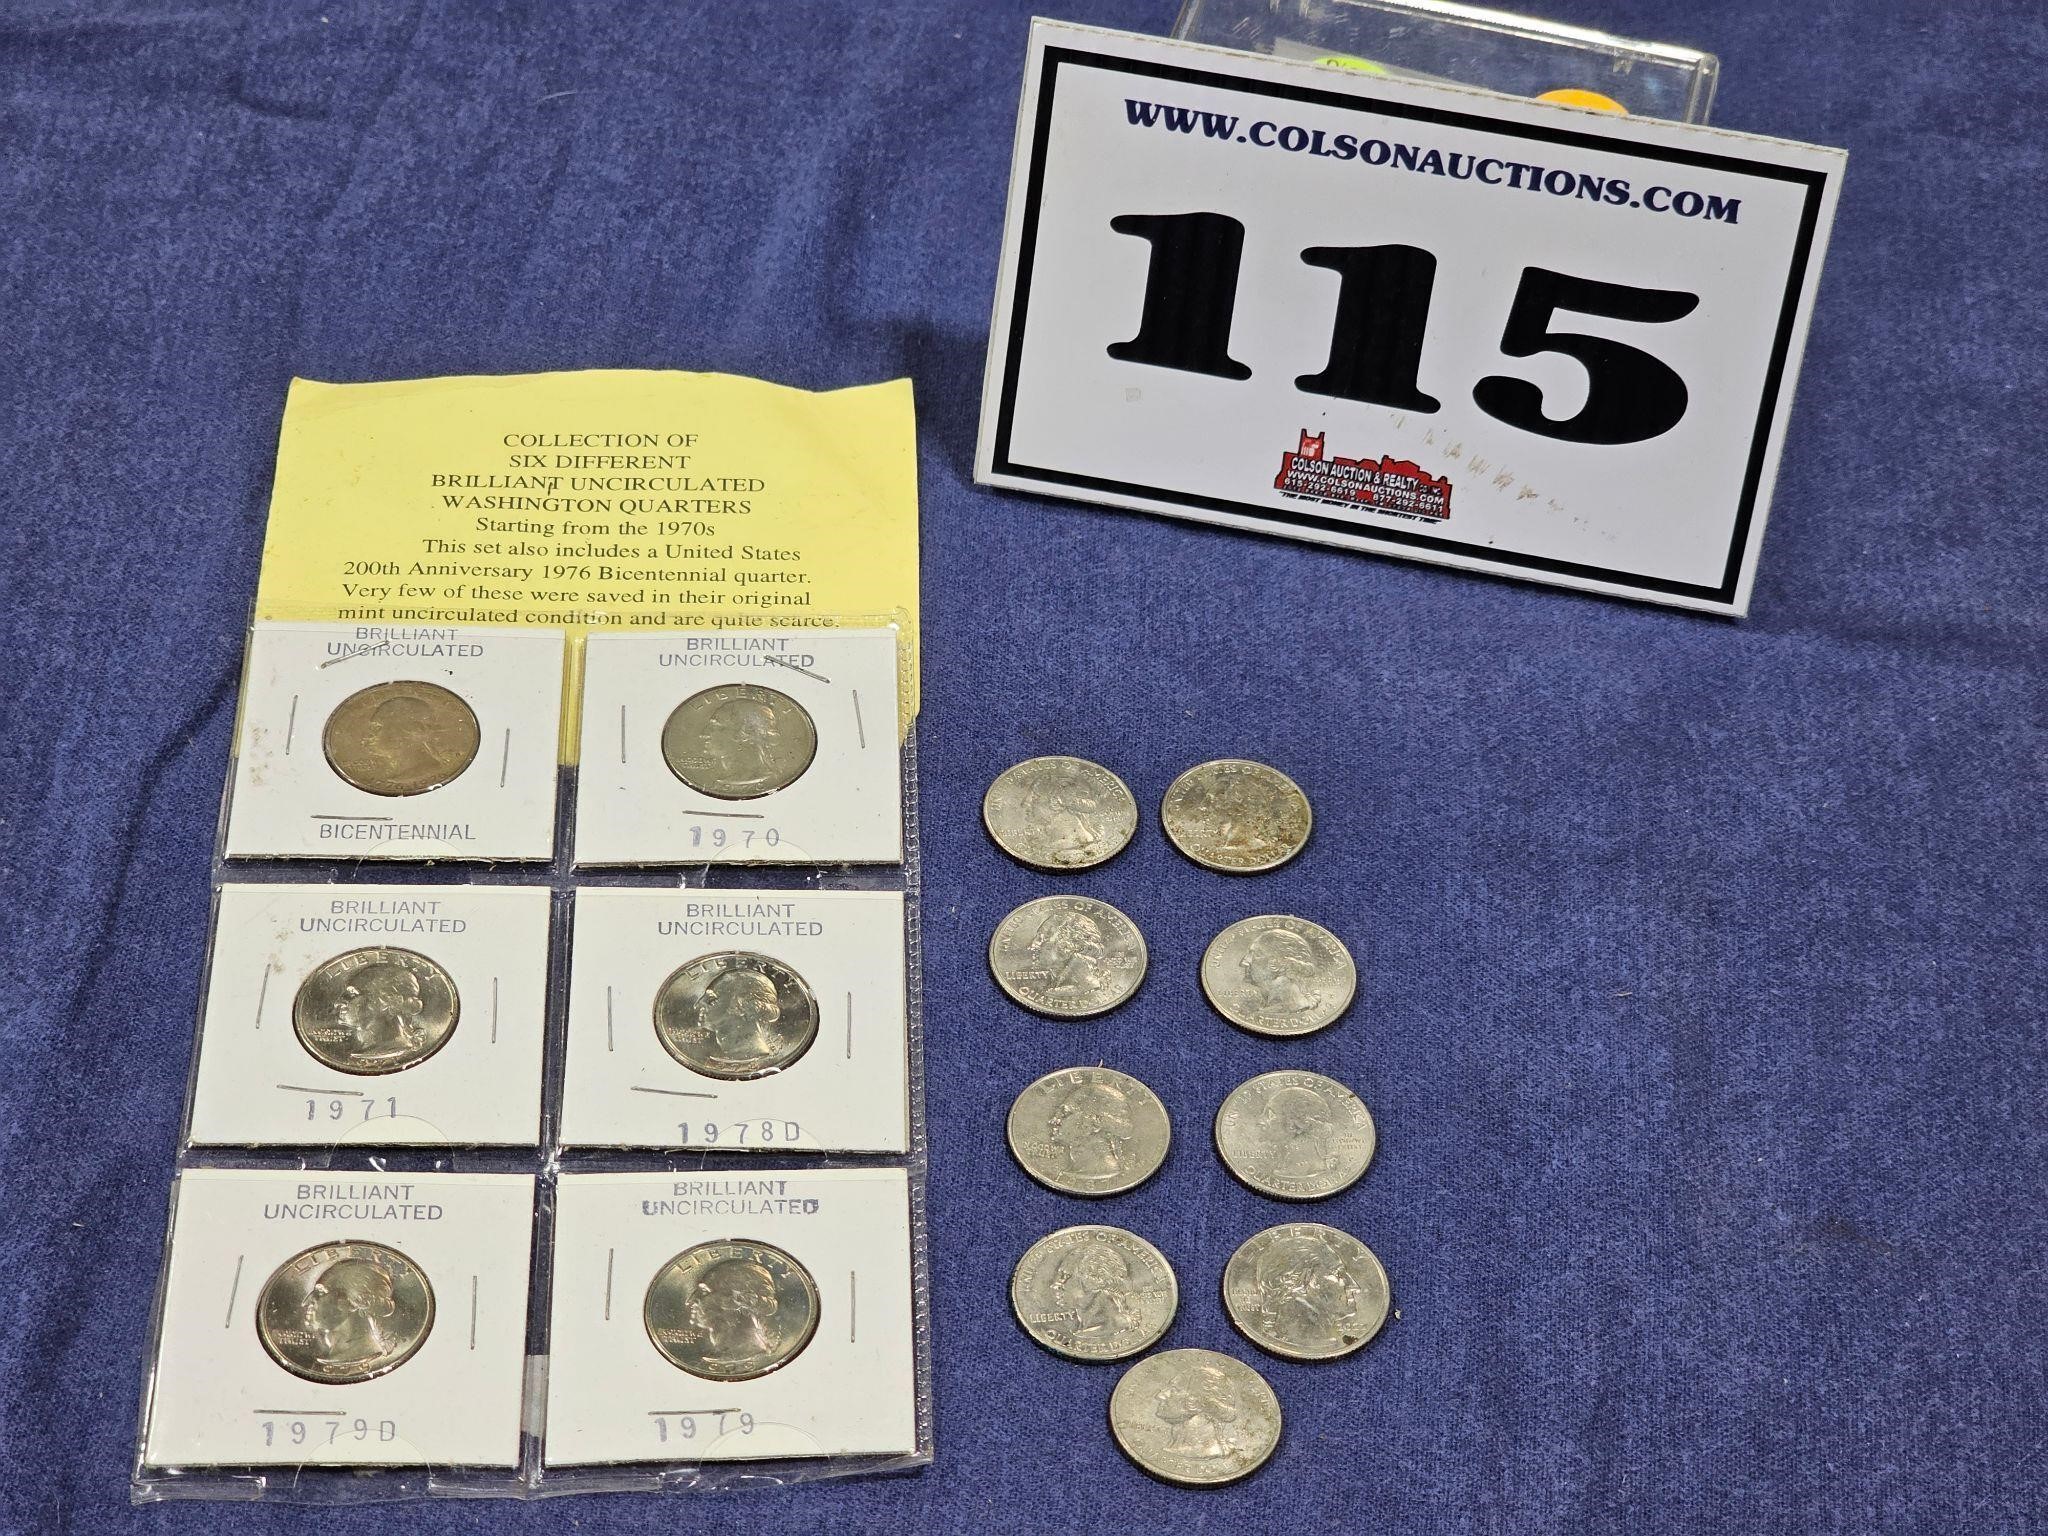 15 Quarters - various years